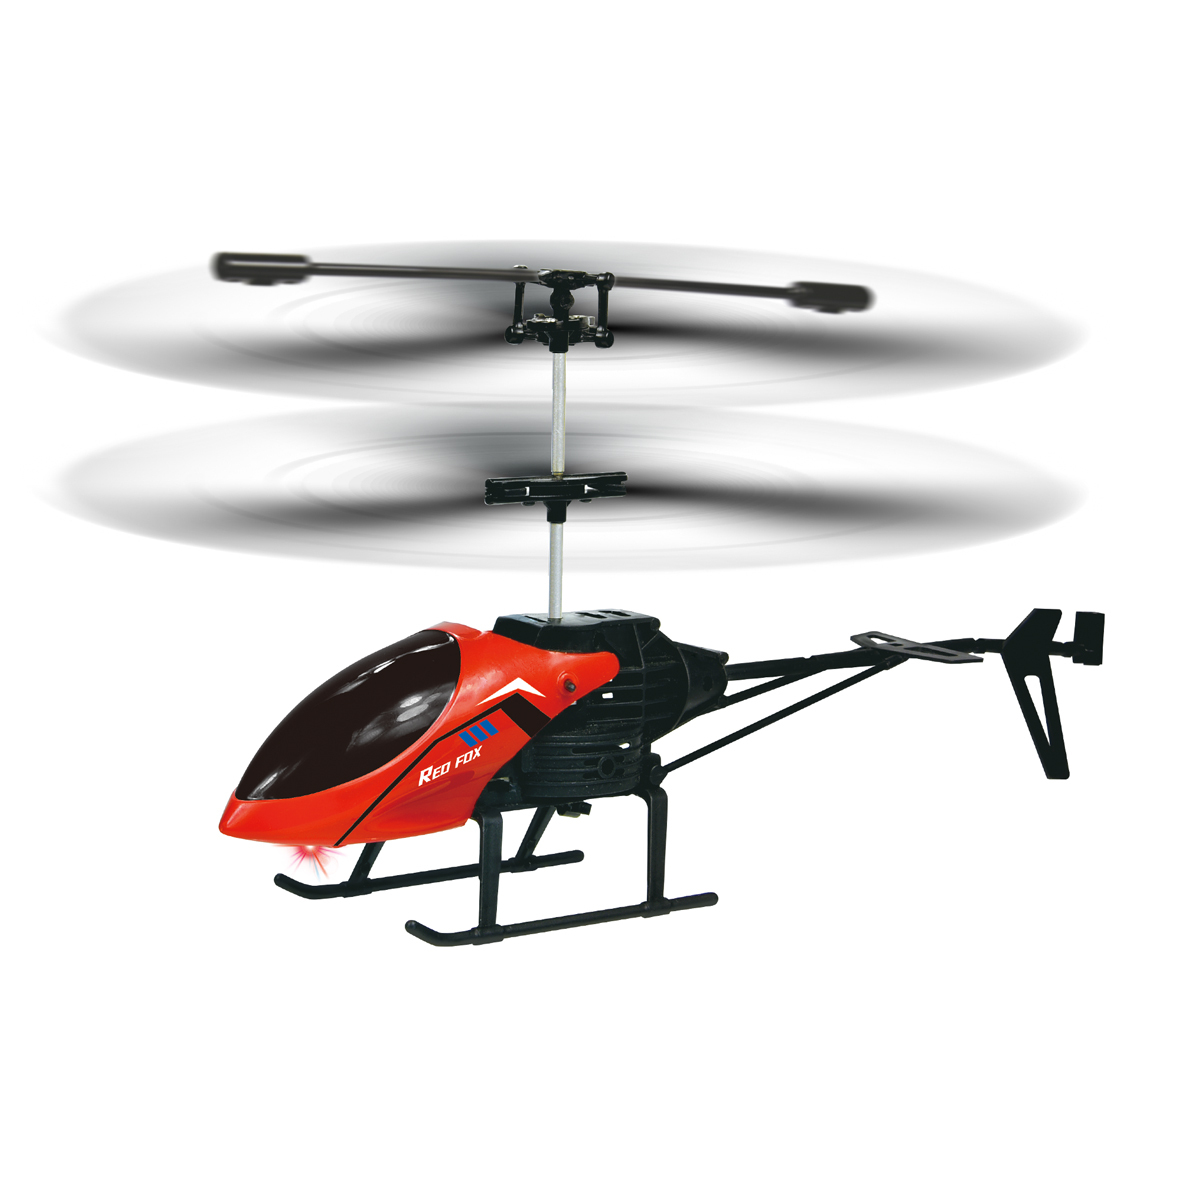 Gear2play RC Red Fox Helikopter